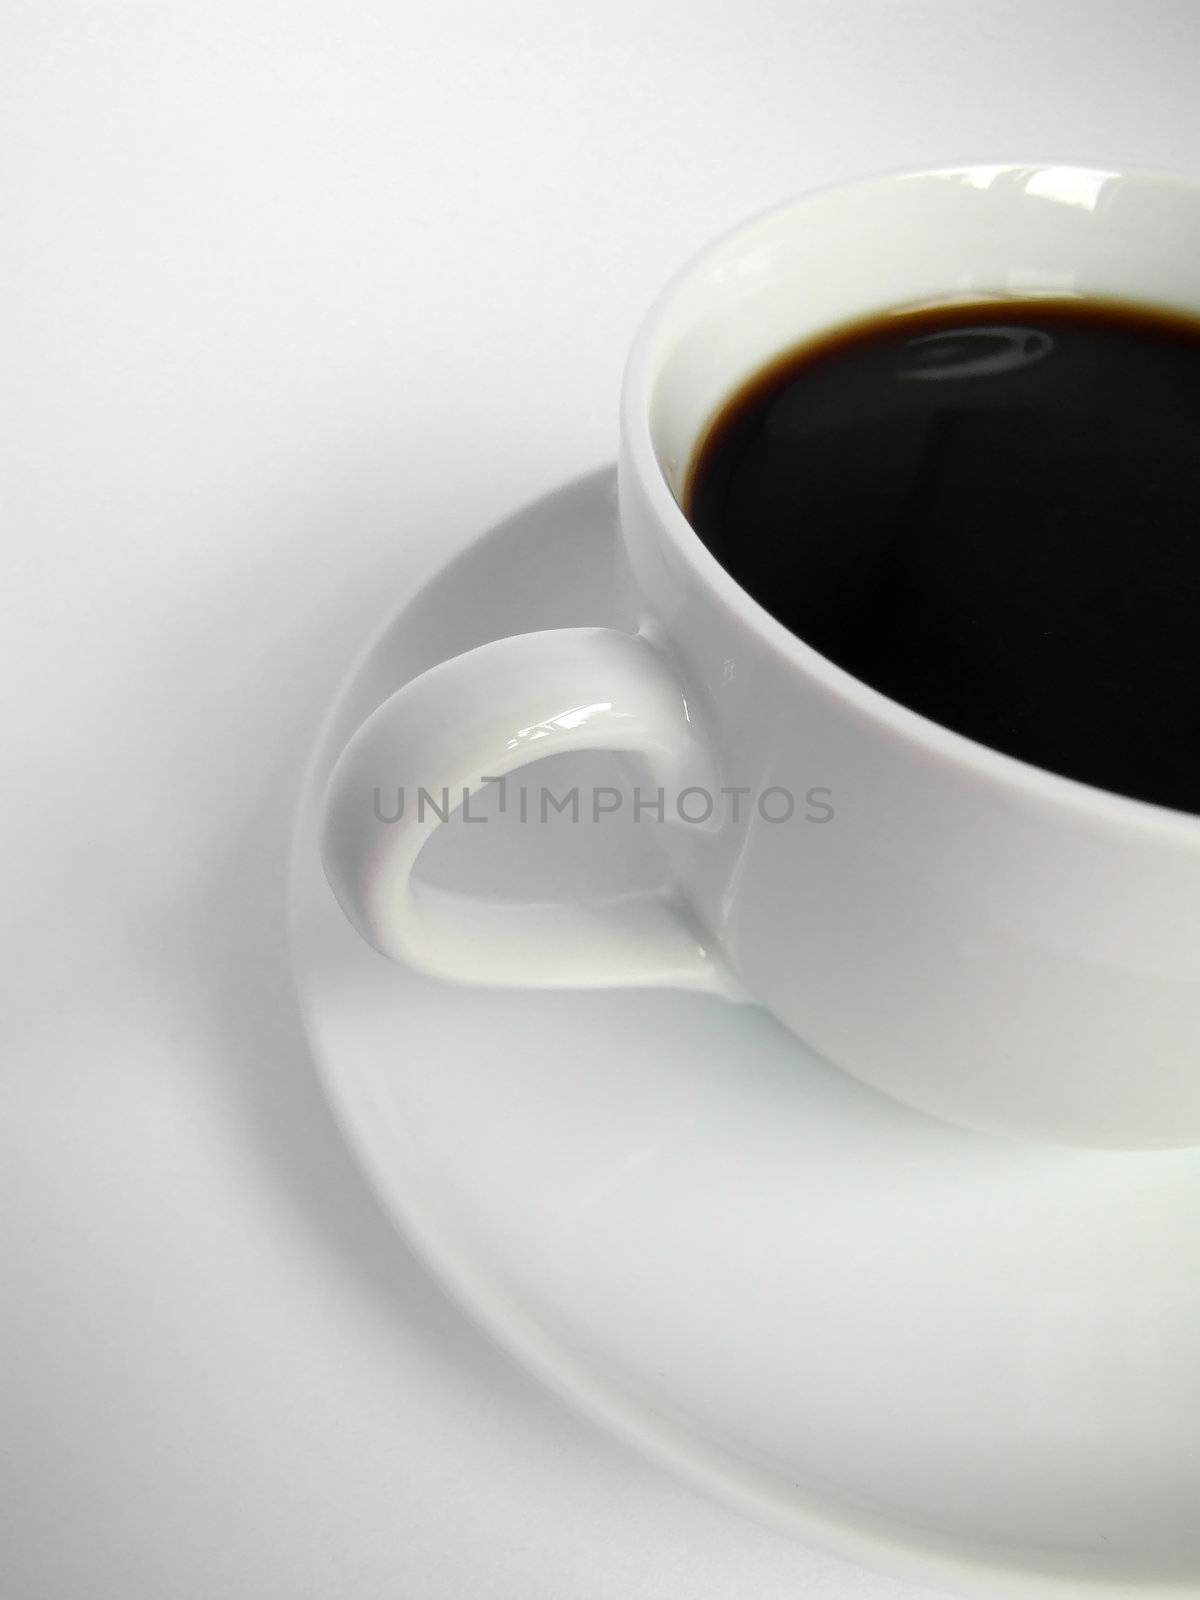 Black coffee in a white cup